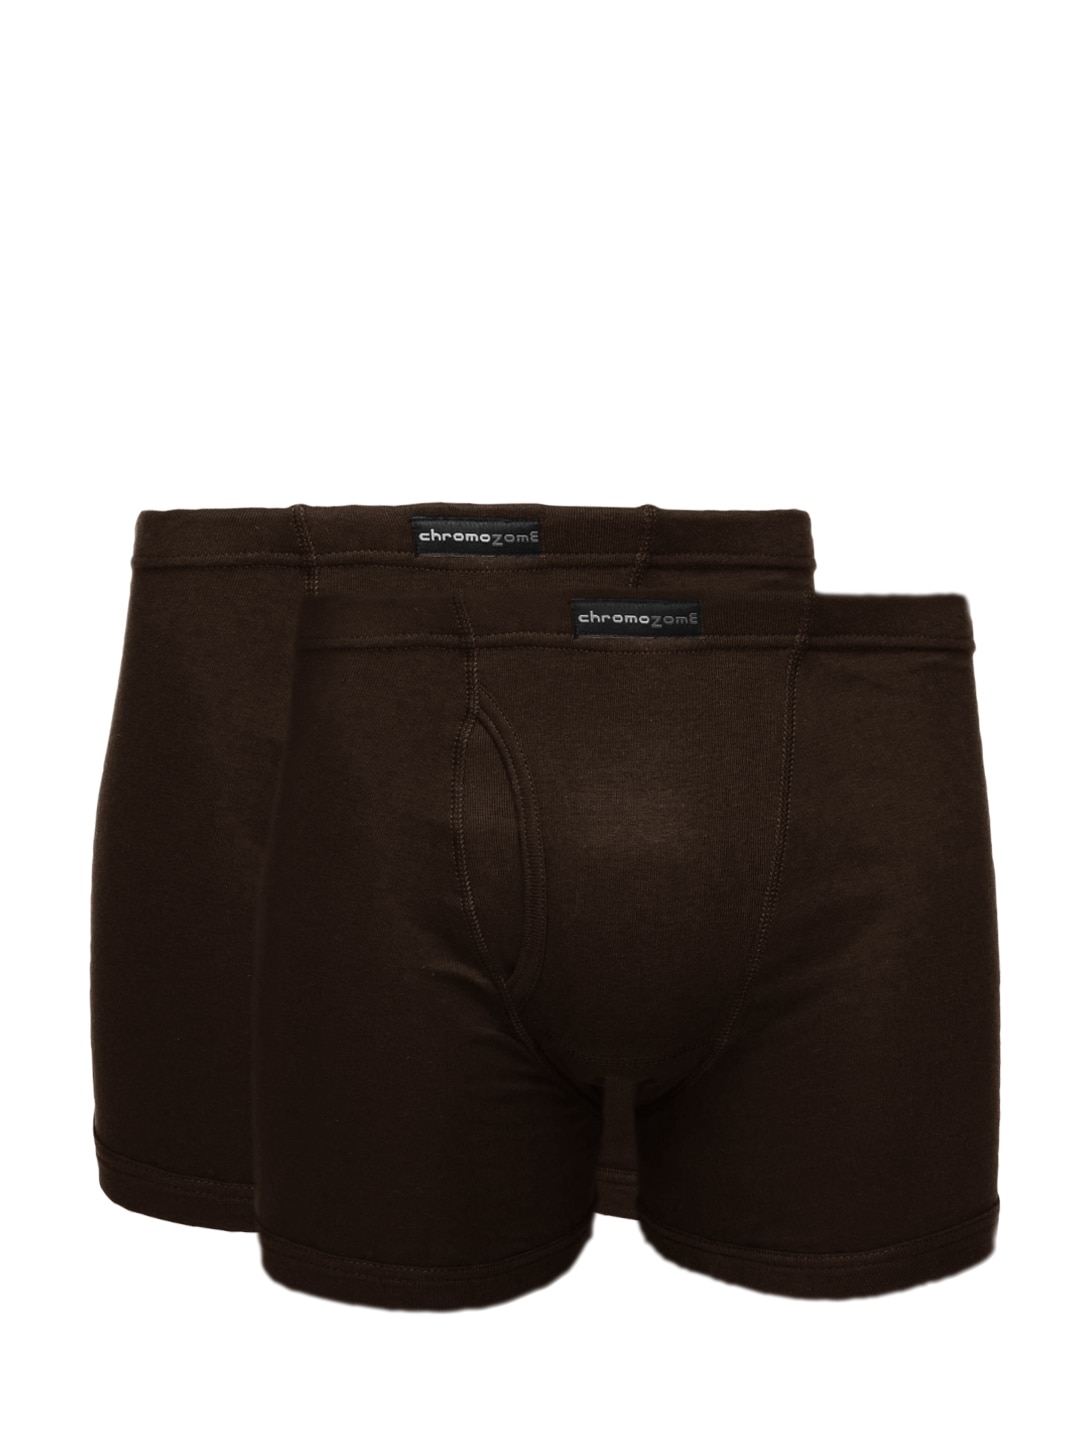 Chromozome Men Pack of Two Brown Trunks